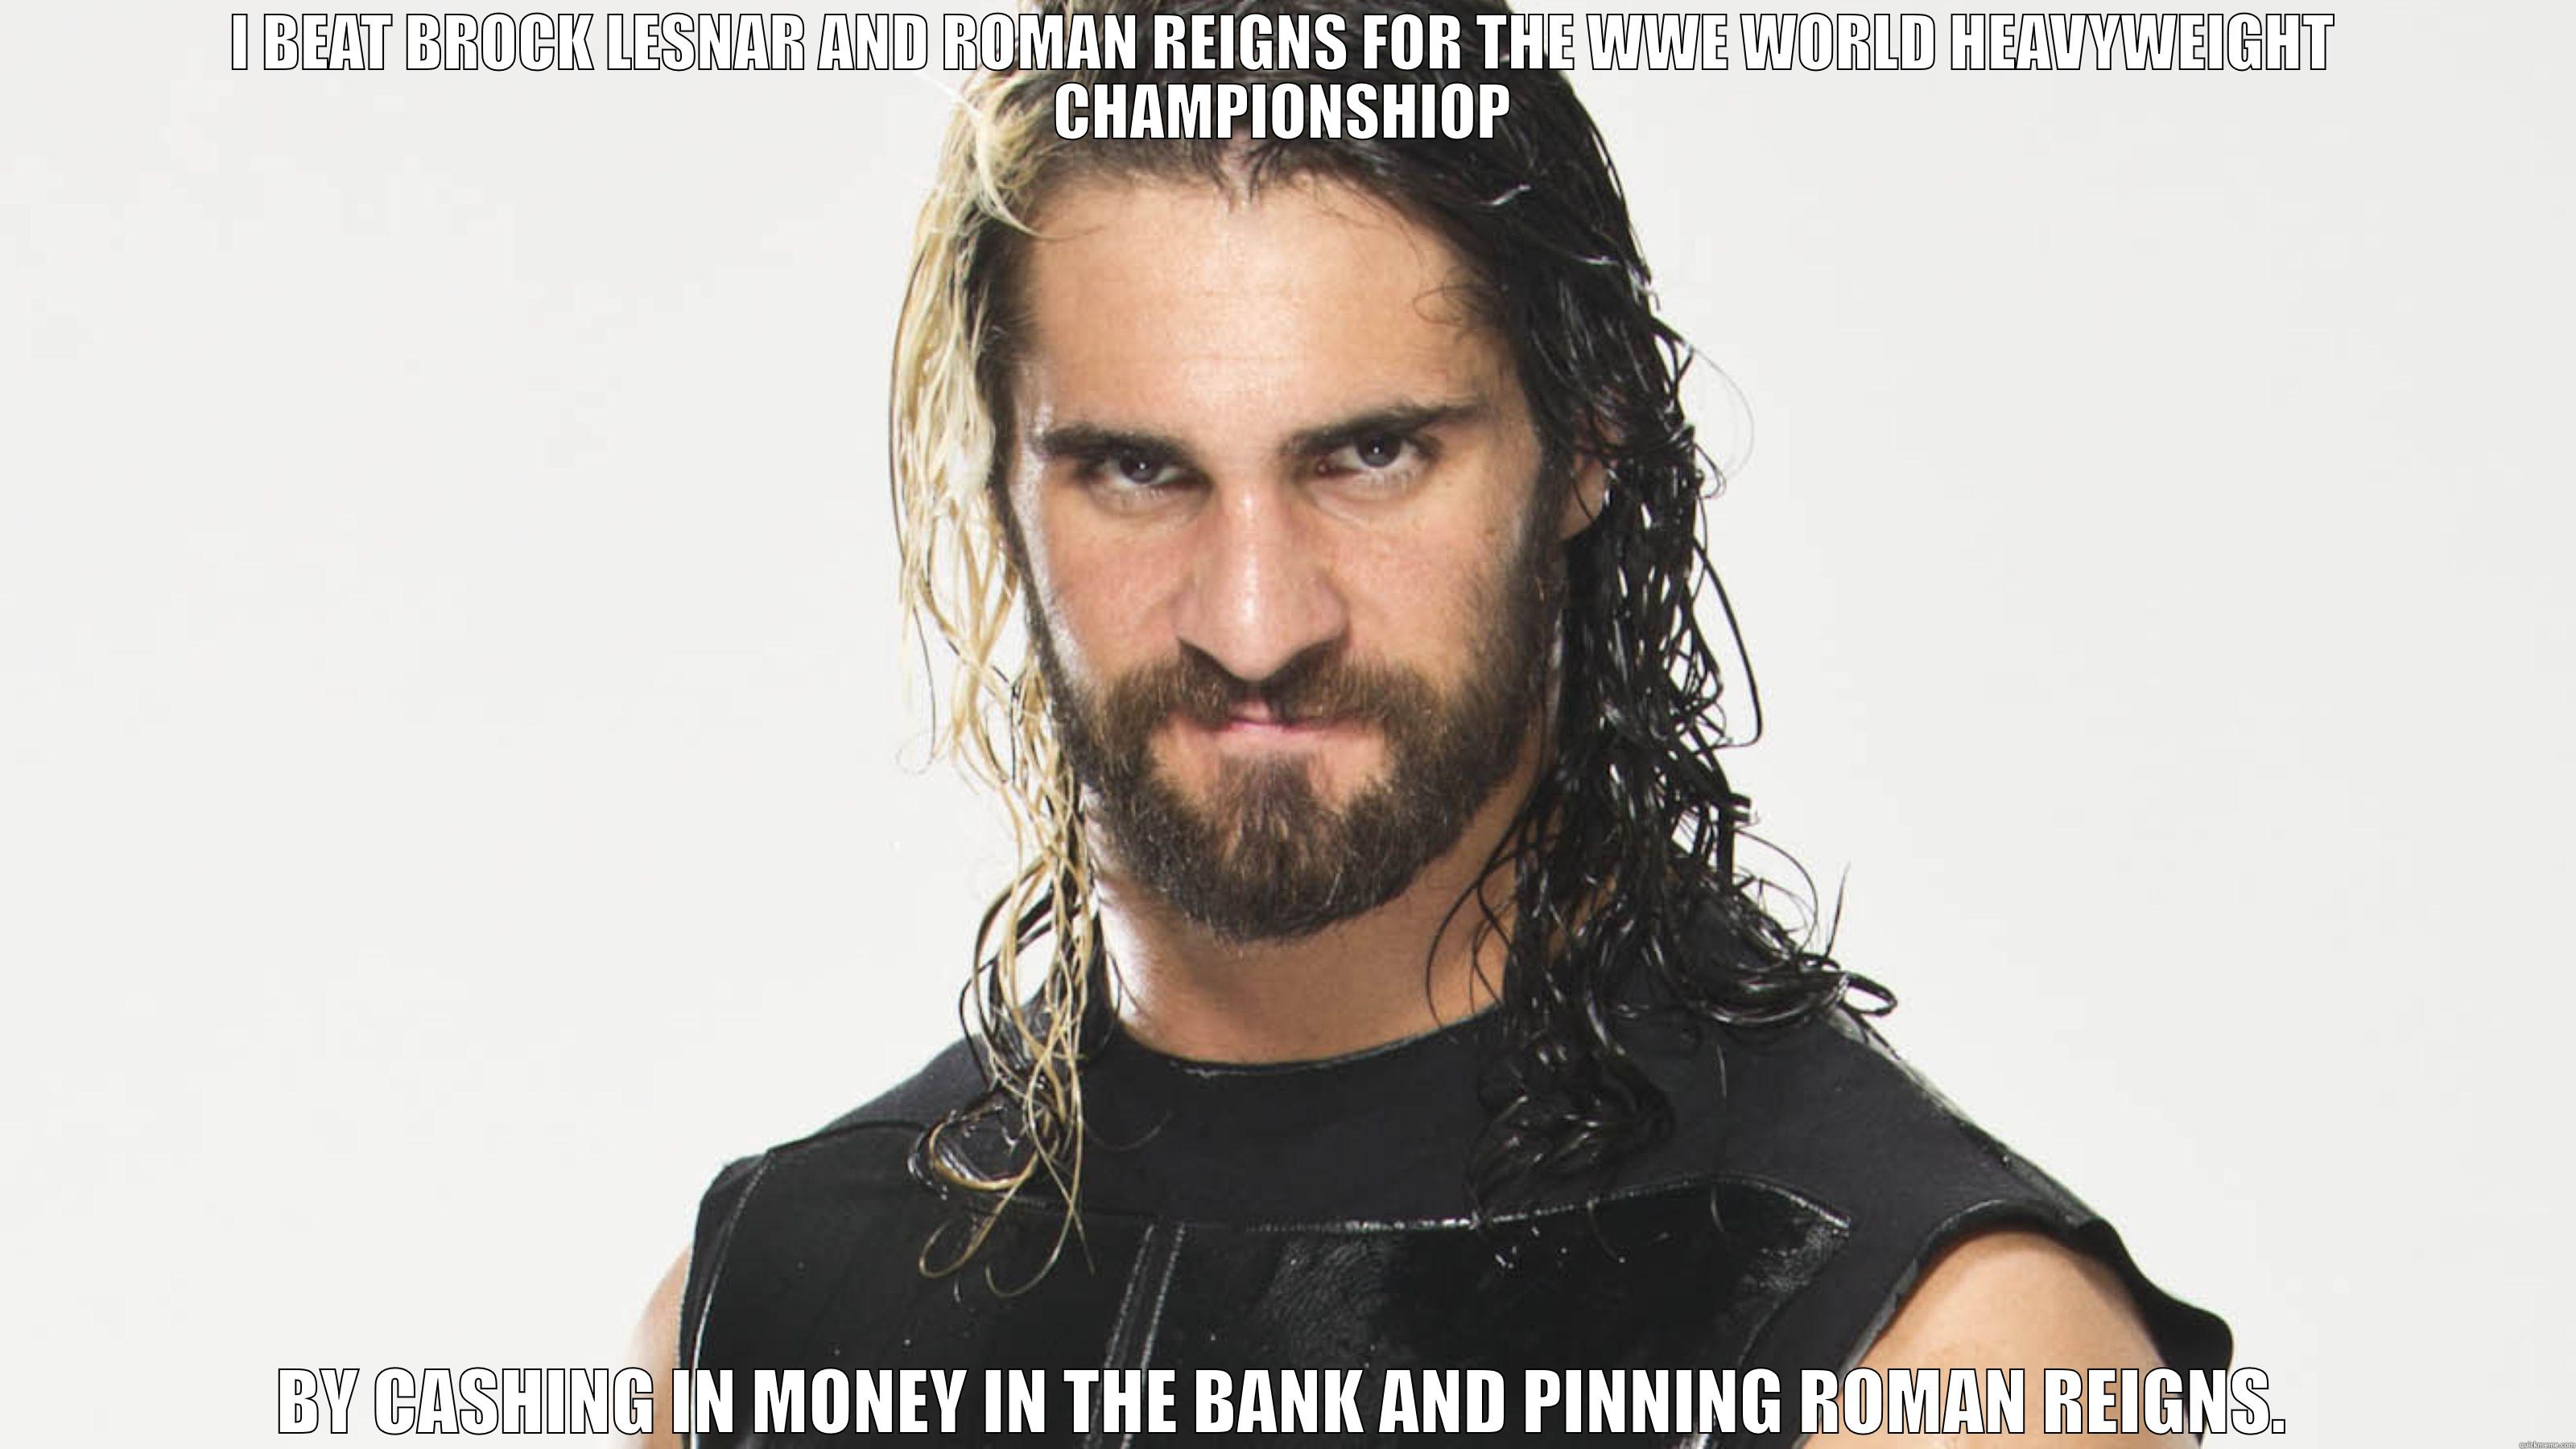 Seth Rollins - I BEAT BROCK LESNAR AND ROMAN REIGNS FOR THE WWE WORLD HEAVYWEIGHT CHAMPIONSHIOP BY CASHING IN MONEY IN THE BANK AND PINNING ROMAN REIGNS. Misc